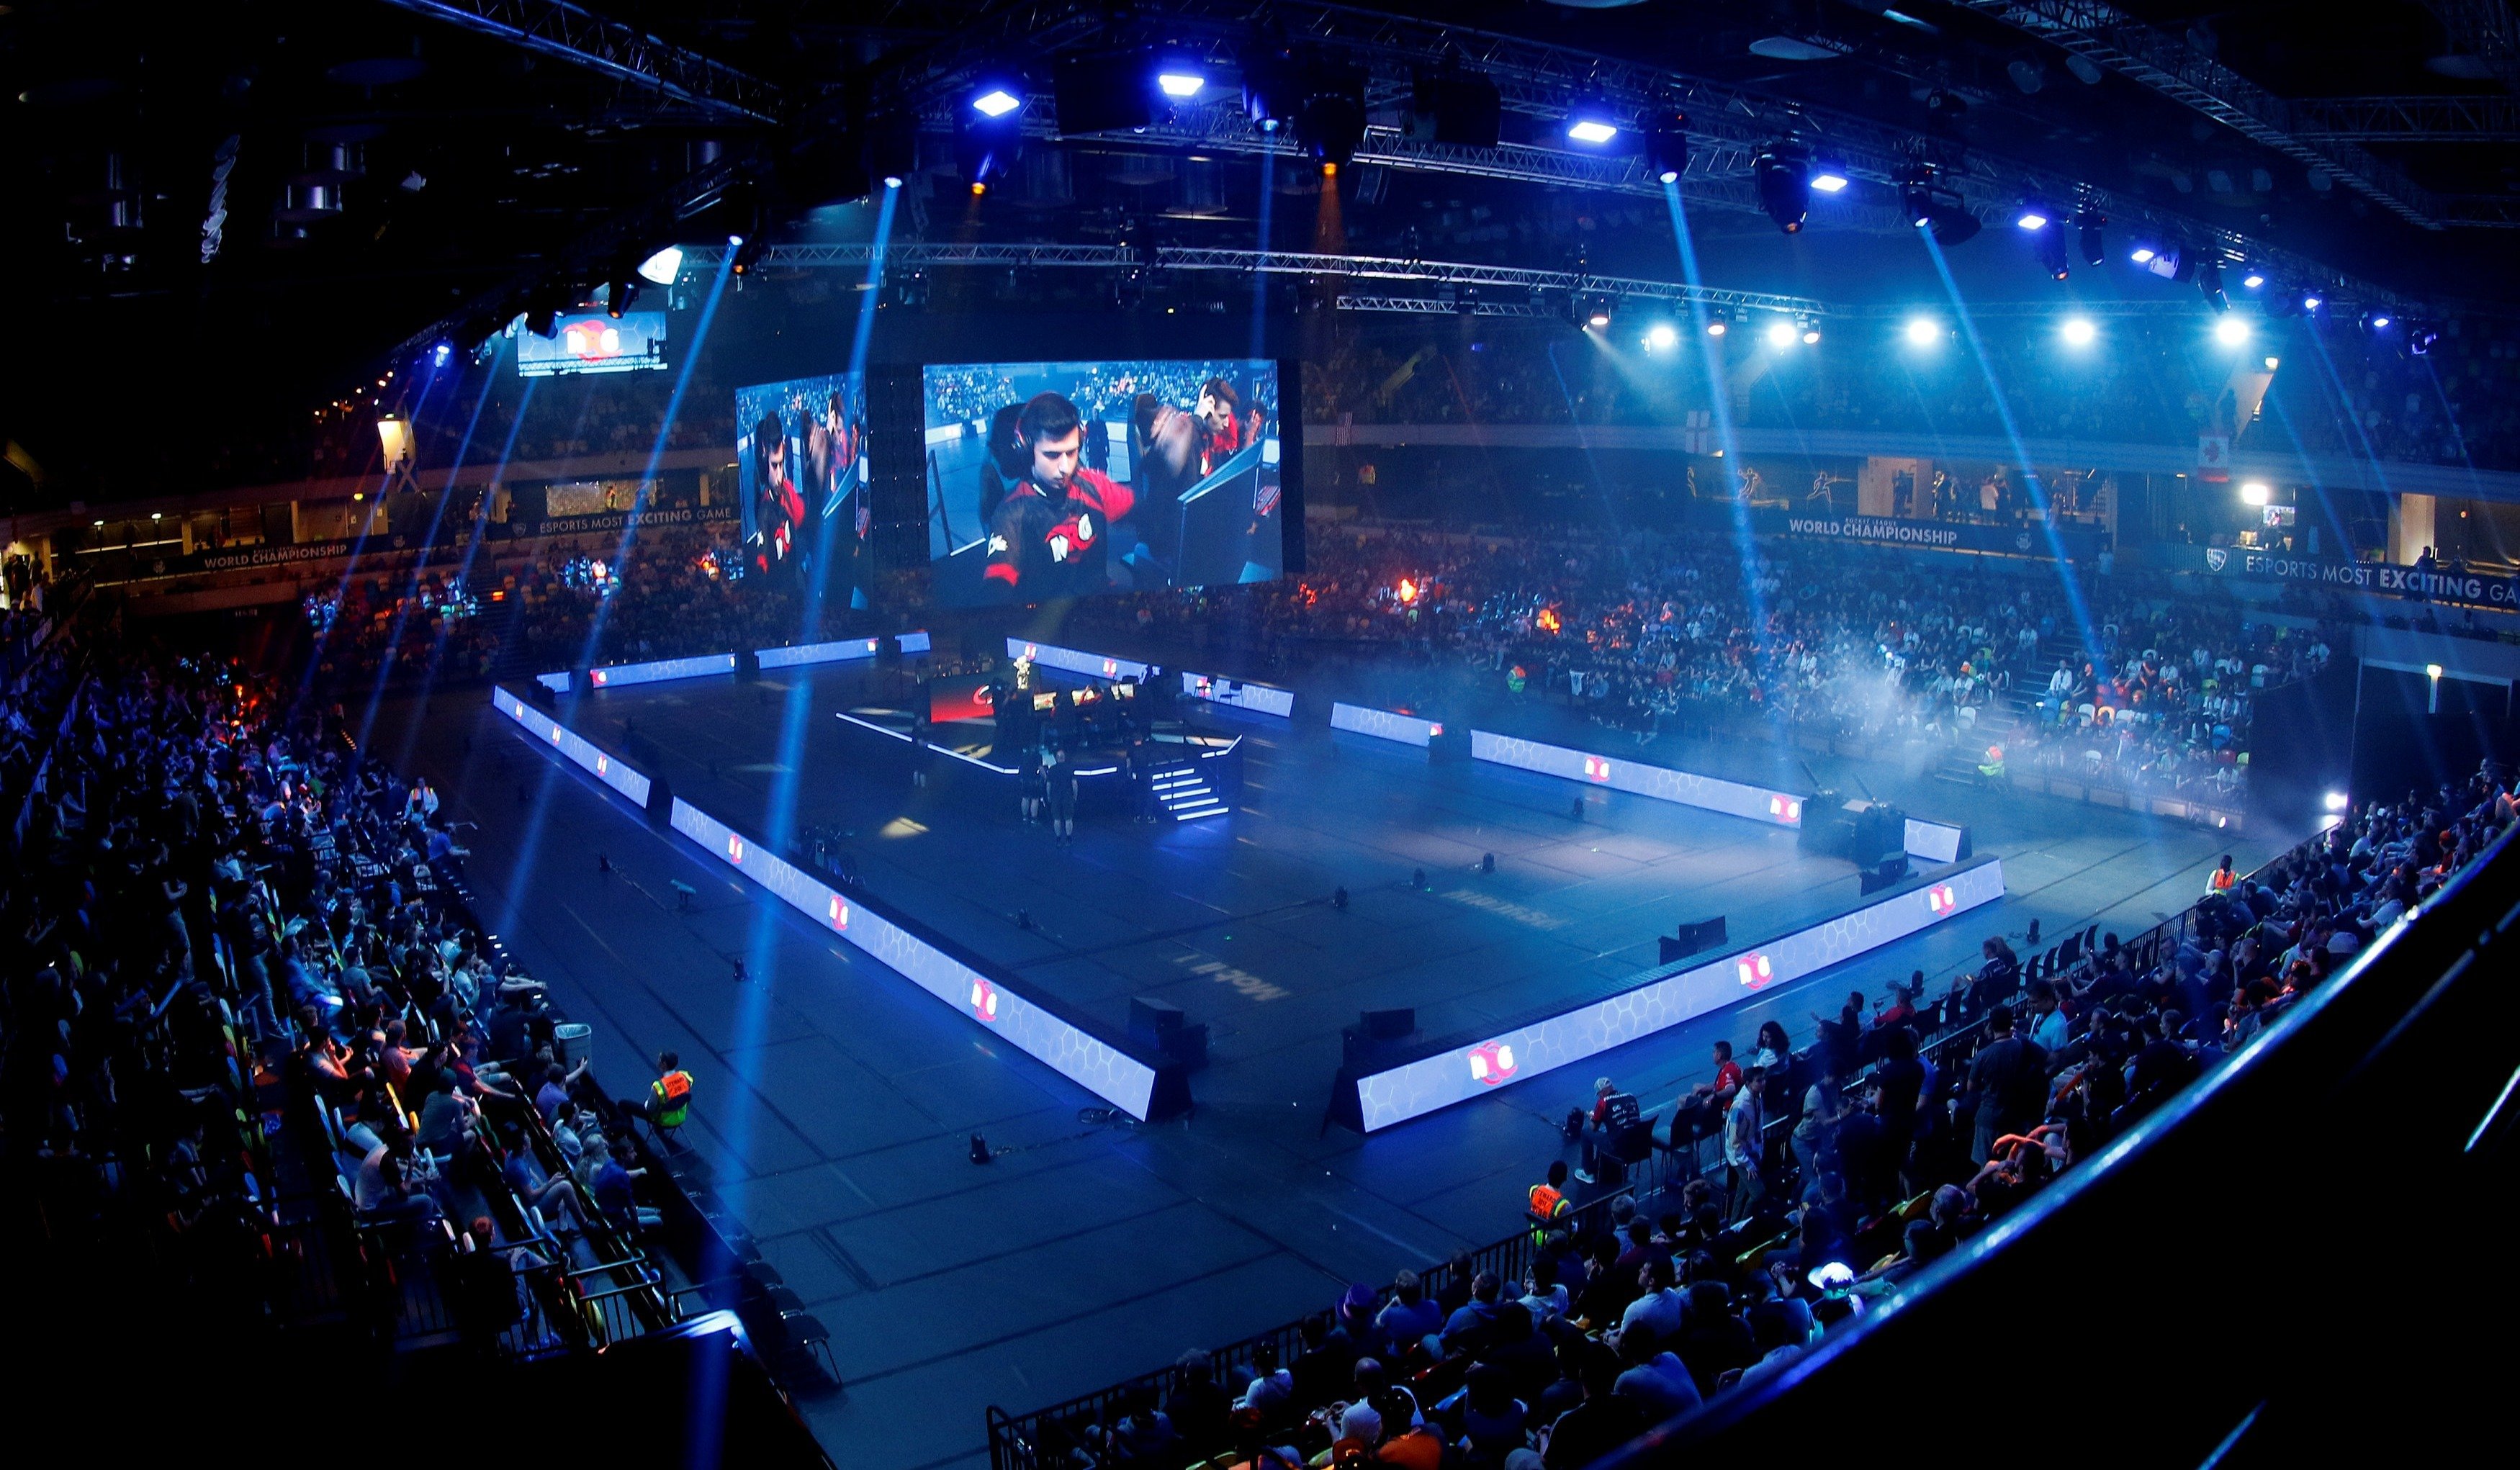 2020 Infront trends to watch - Esports